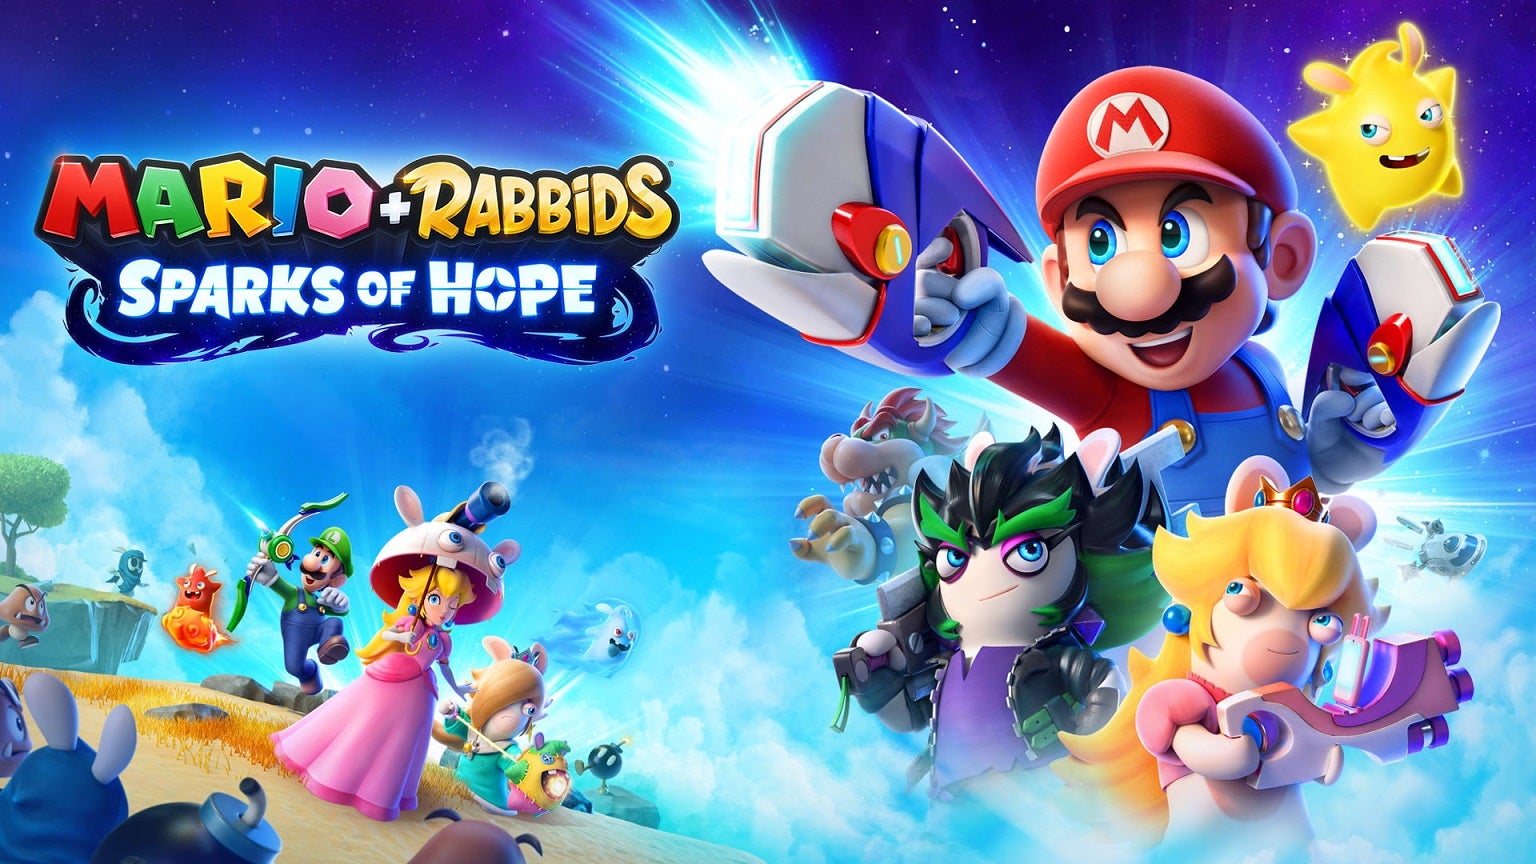 Image for Mario + Rabbids Sparks of Hope, Avatar: Frontiers of Pandora lead Ubisoft's E3